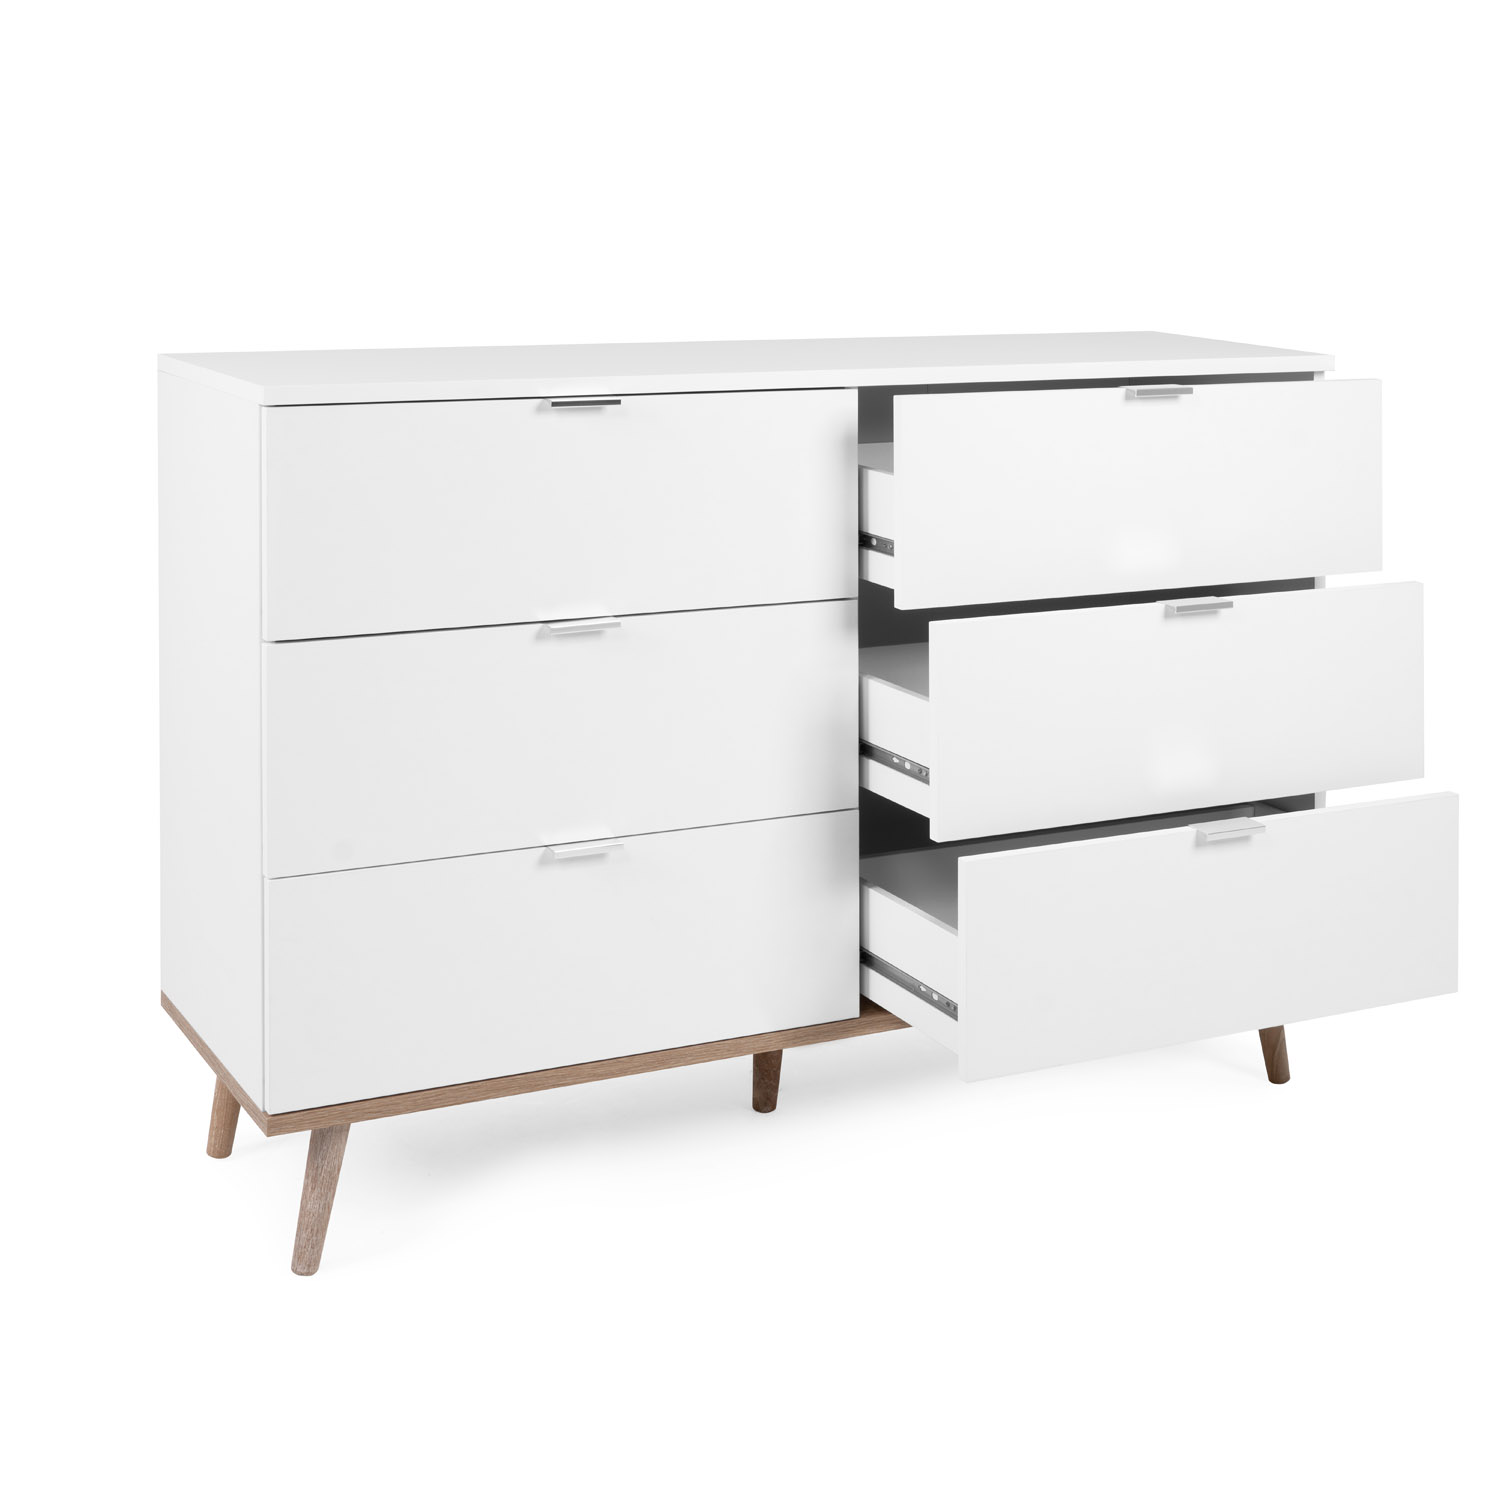 Chest of Drawers Sideboard White Wood Bedroom Wardrobe